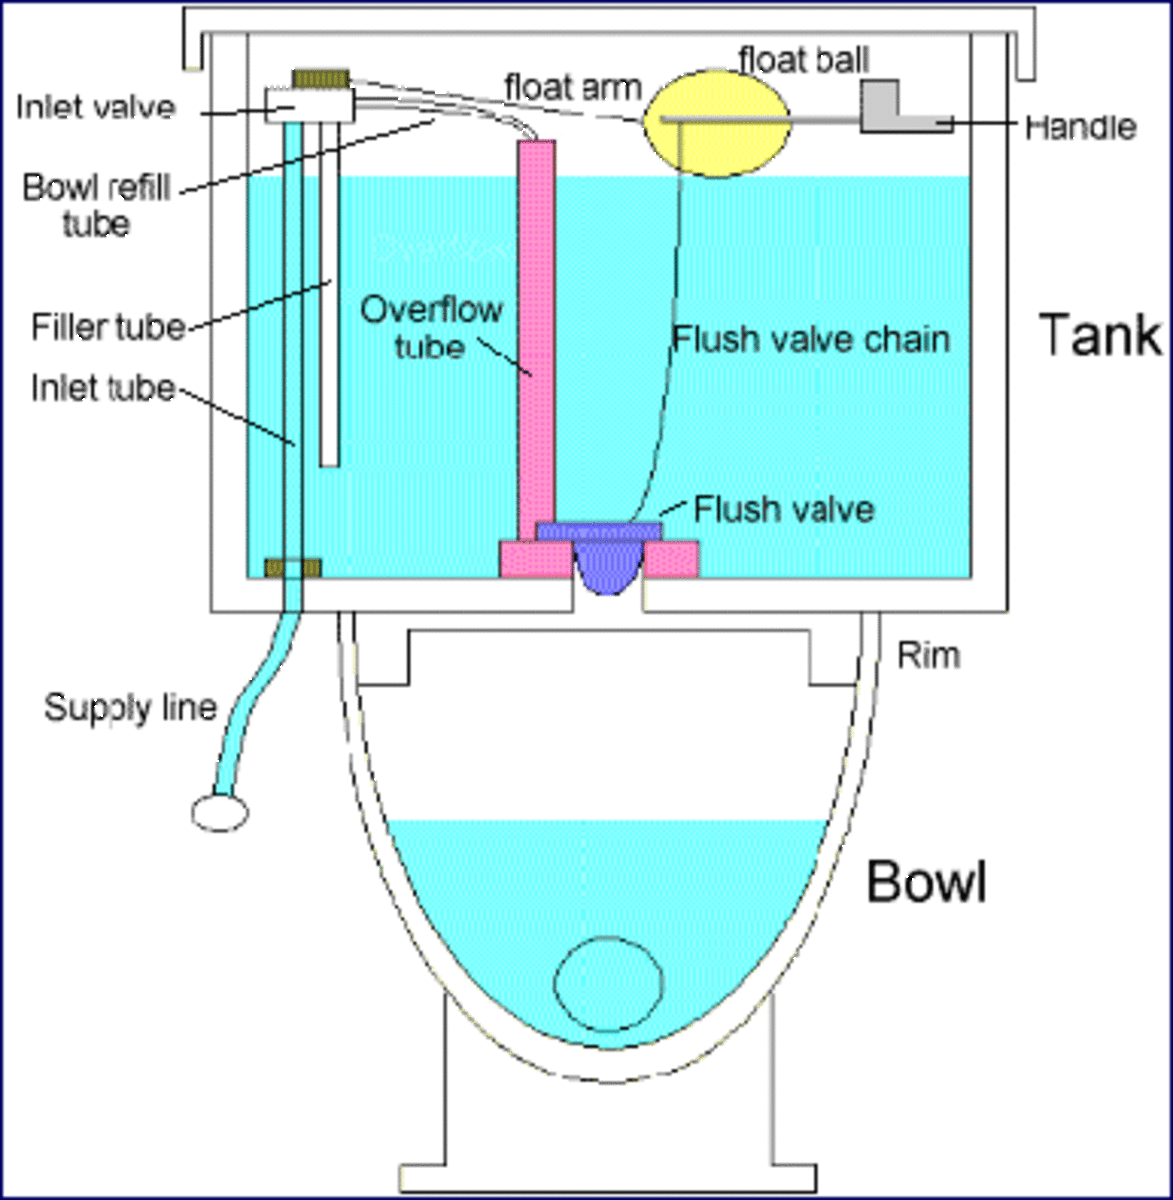 usikre et eller andet sted oase What Are the Parts of a Toilet? (With Diagram) - Dengarden